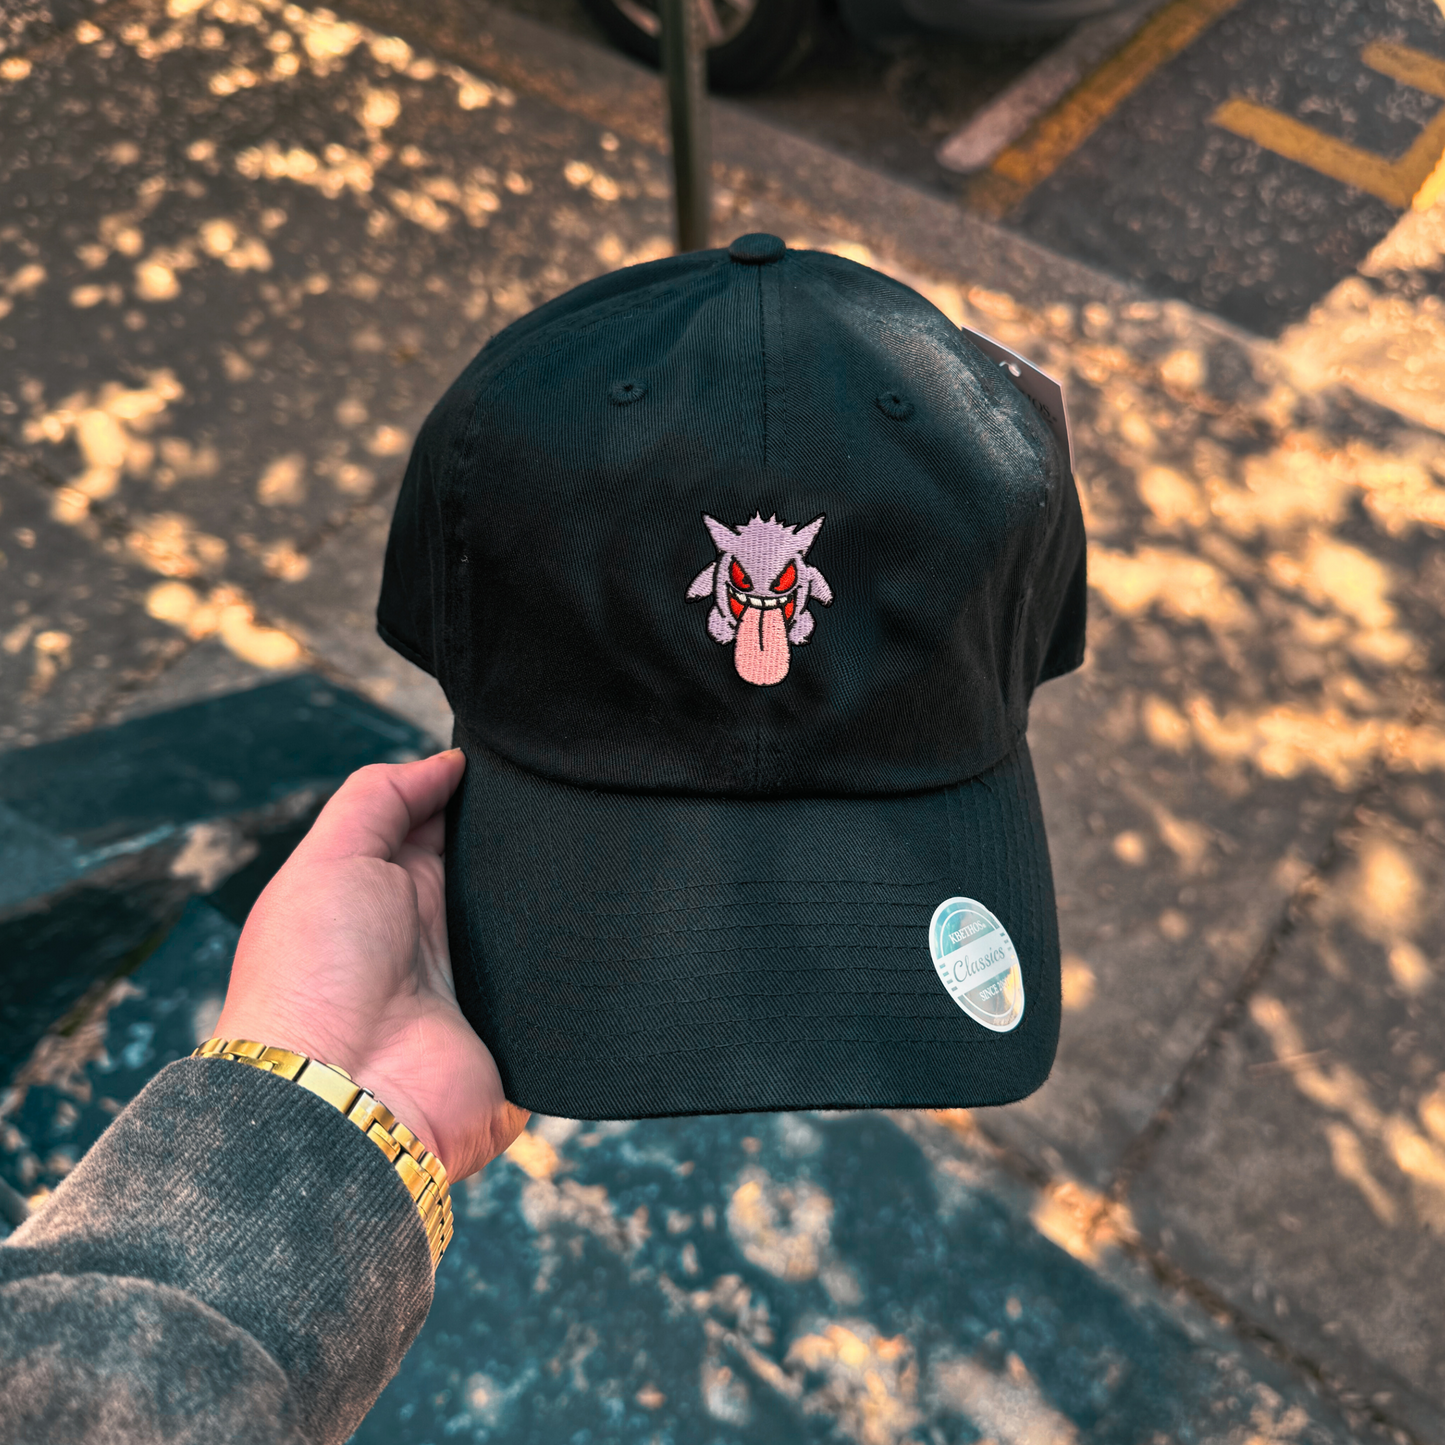 Gengar Embroidered Hat - GLOW in the Dark Features